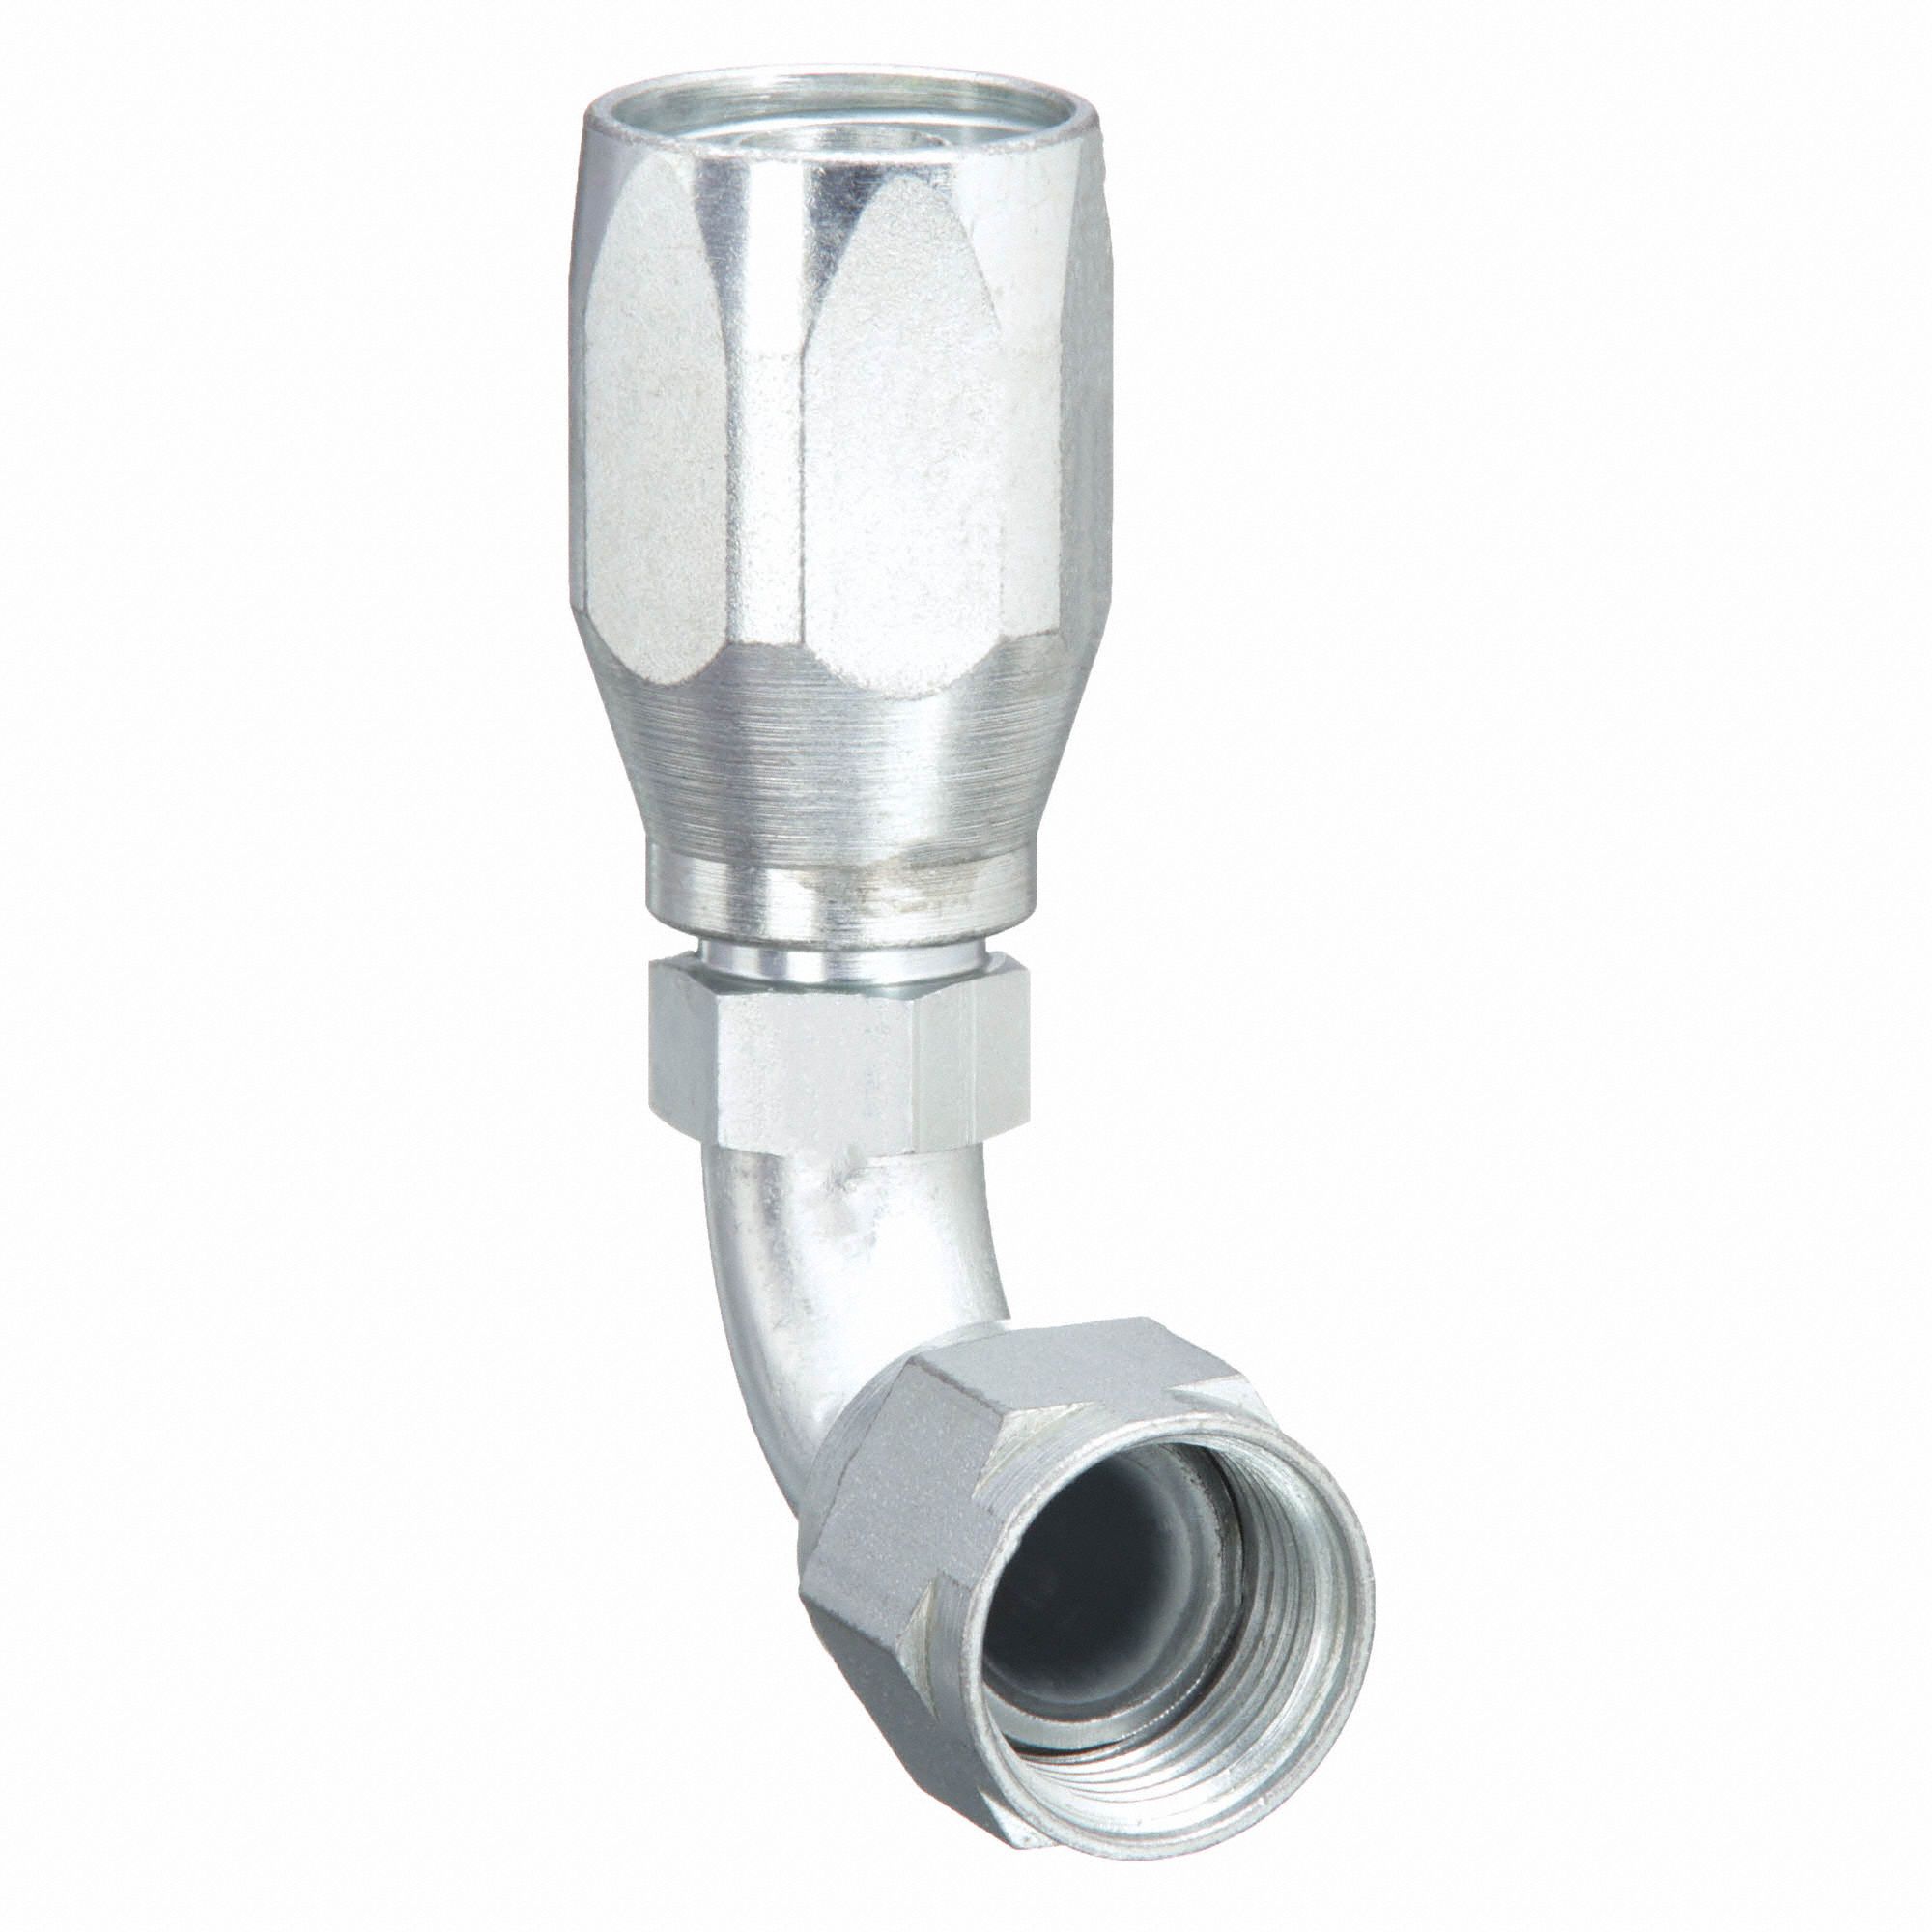 FP TEE Hydraulic FP Details about   5605-6-6-6 Fitting FP